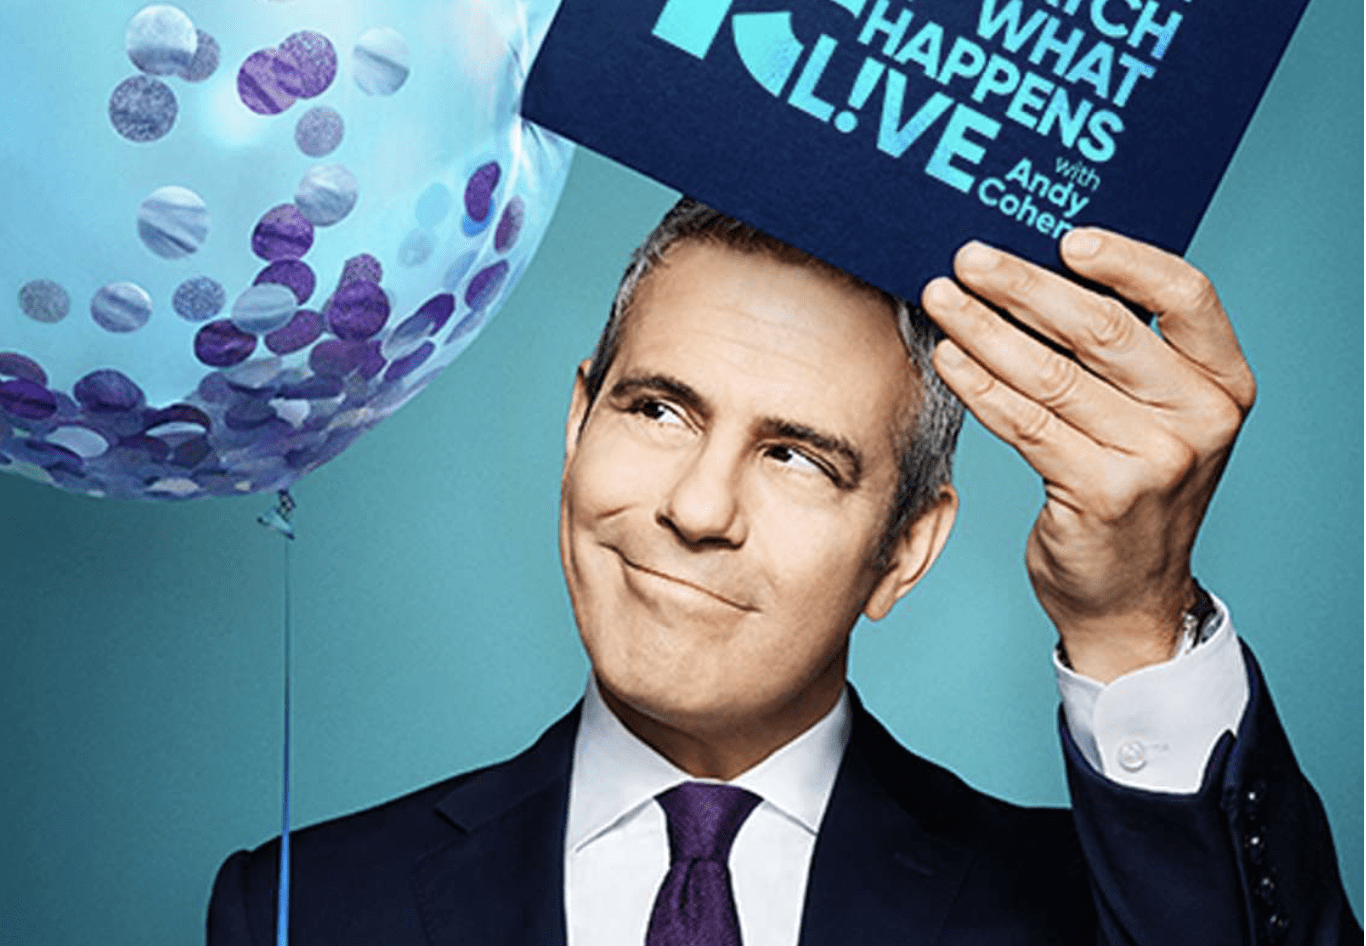 Watch What Happens Live with Andy Cohen Gets 15th Anniversary Special on Bravo